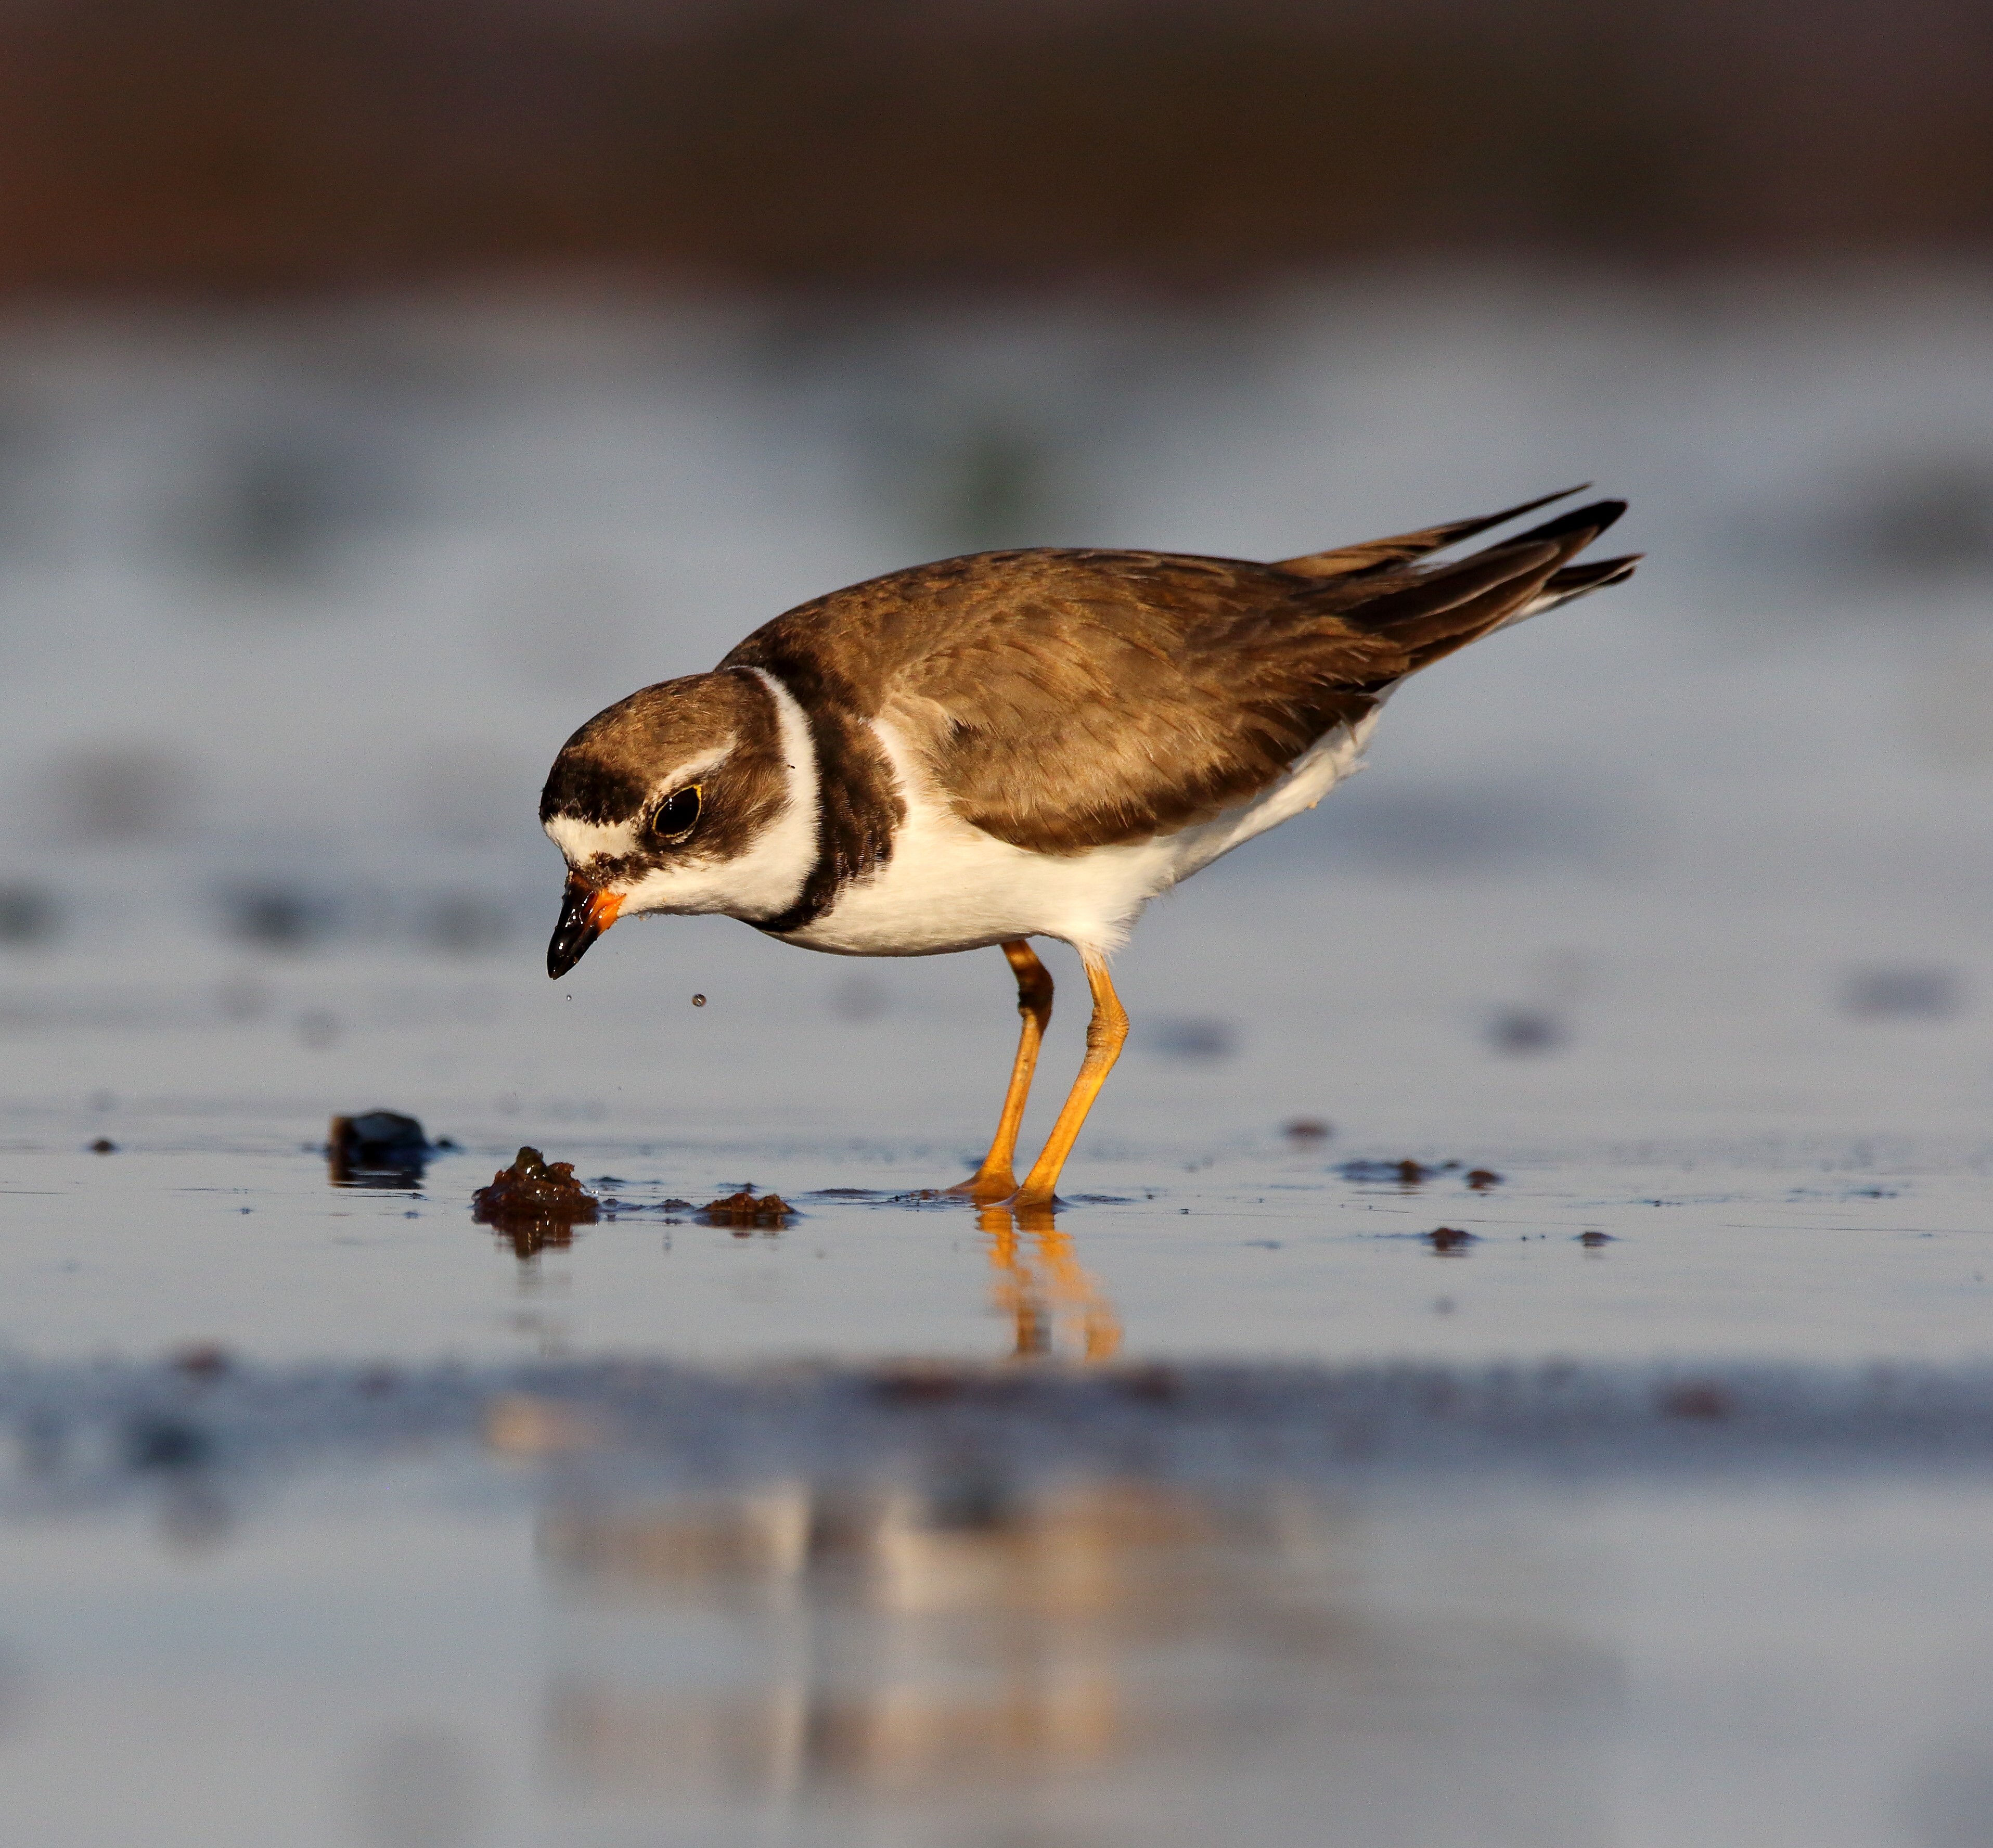 Semipalmated Plovers stop by the shores of Canarsie Park during migration. Photo: <a href="https://www.flickr.com/photos/120553232@N02/" target="_blank">Isaac Grant</a>